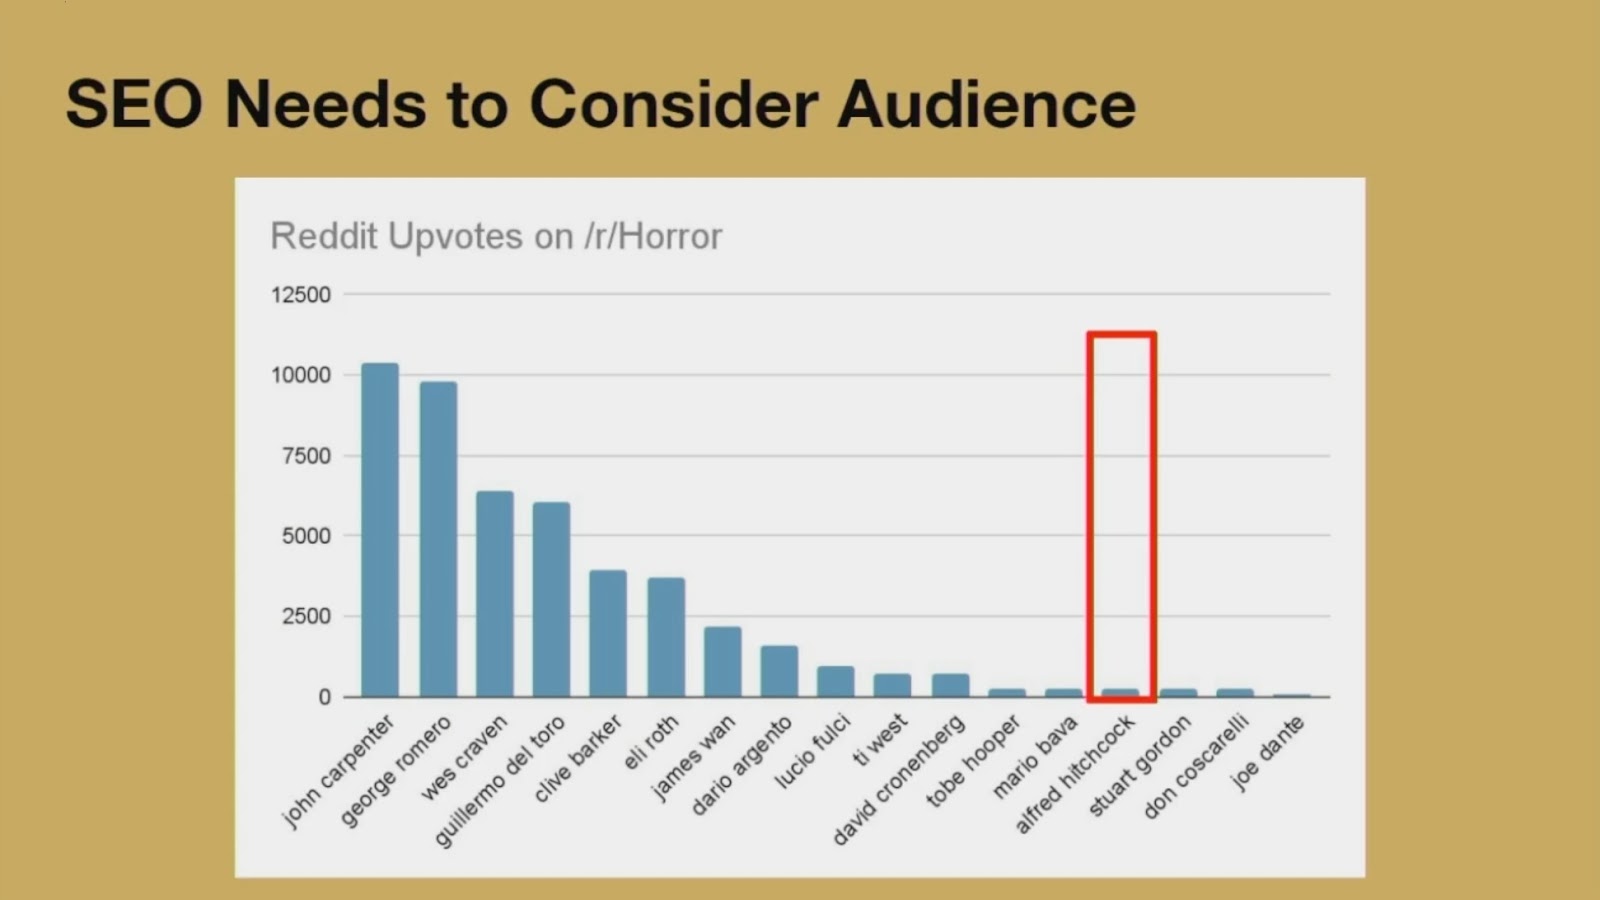 SEO needs to consider audience